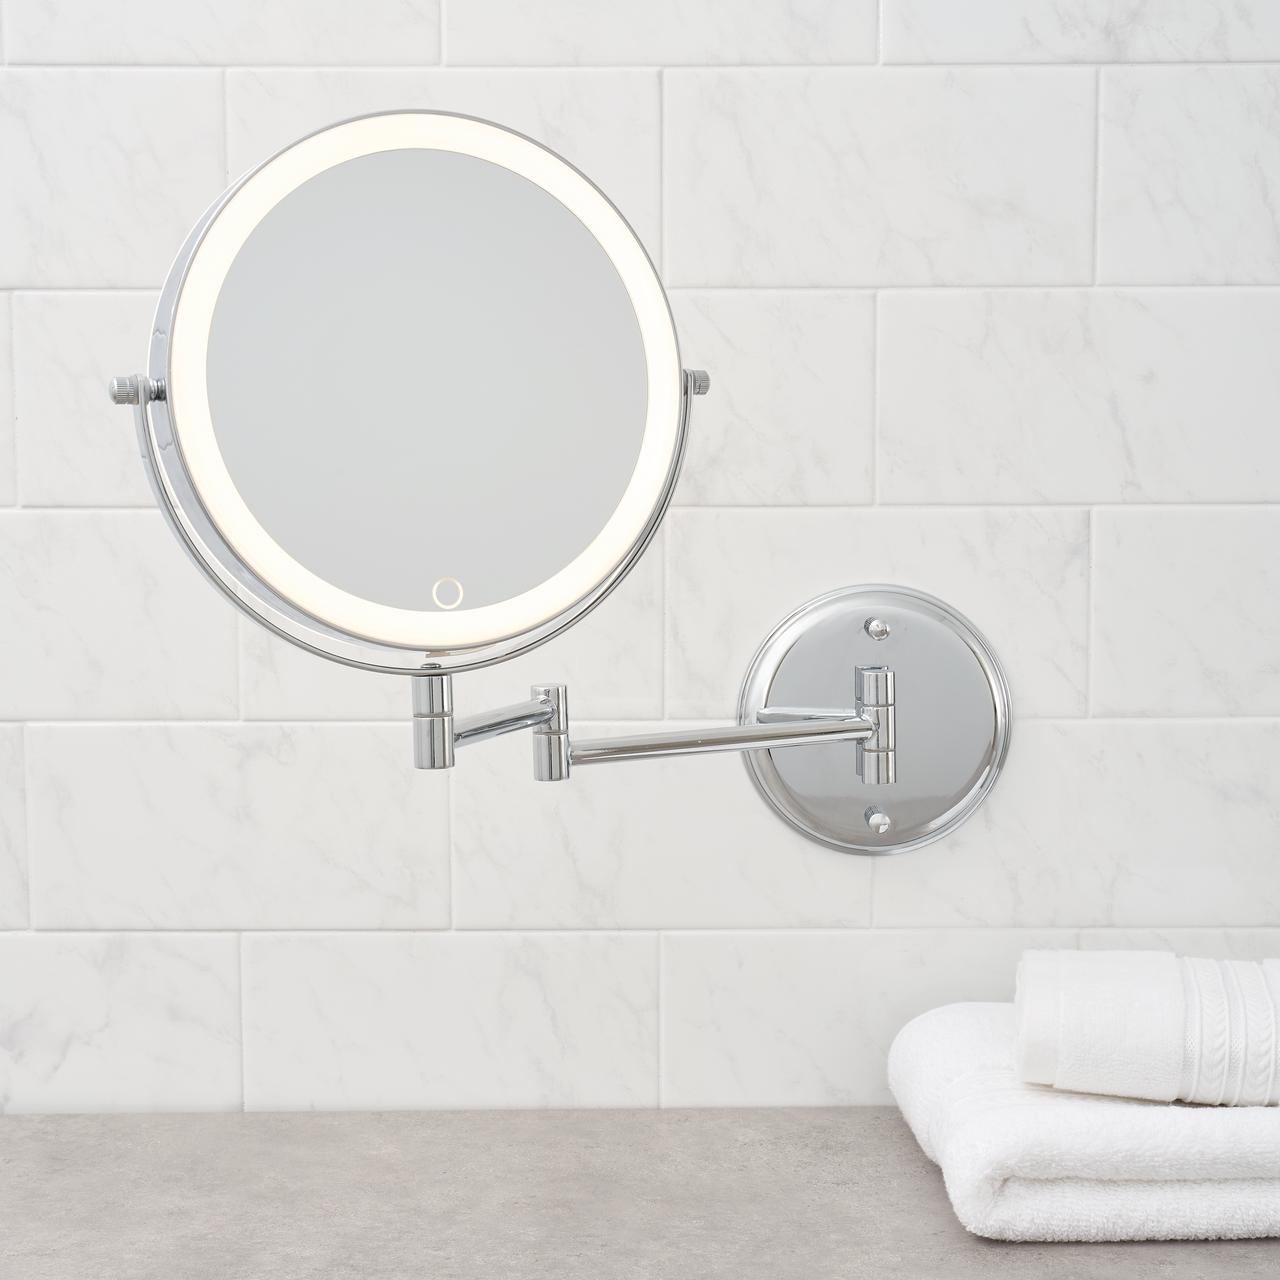 Better Homes & Gardens Modern Round 8 inch Wall Mount LED Mirror - Chrome - image 8 of 11